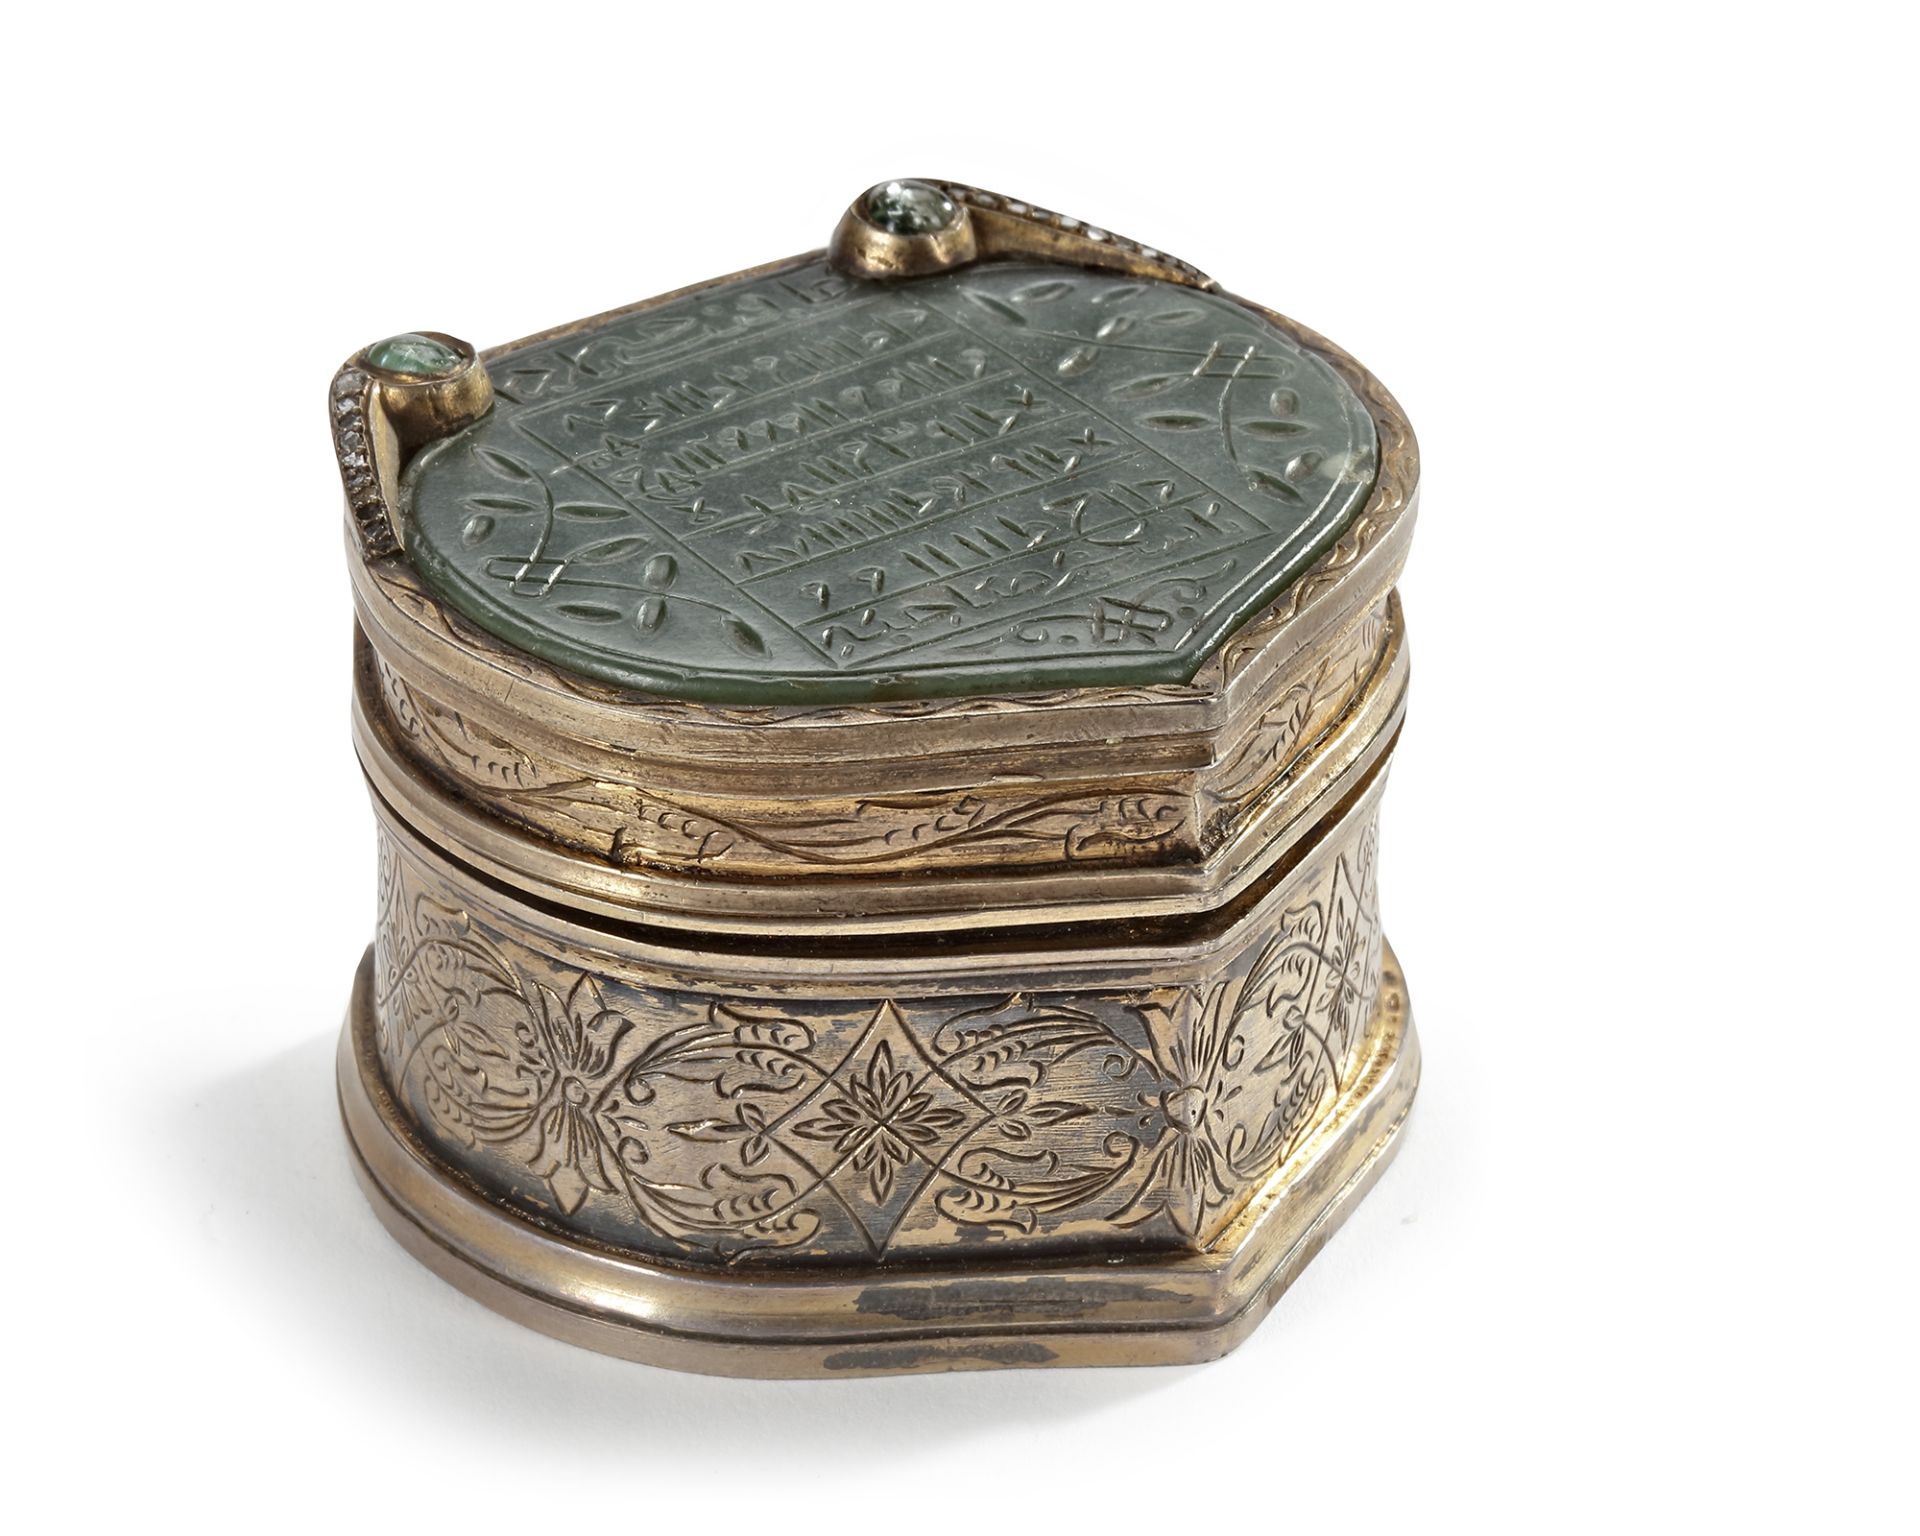 AN OTTOMAN JADE AND GEM-SET SILVER PLATED CASKET, 16TH CENTURY - Image 8 of 12